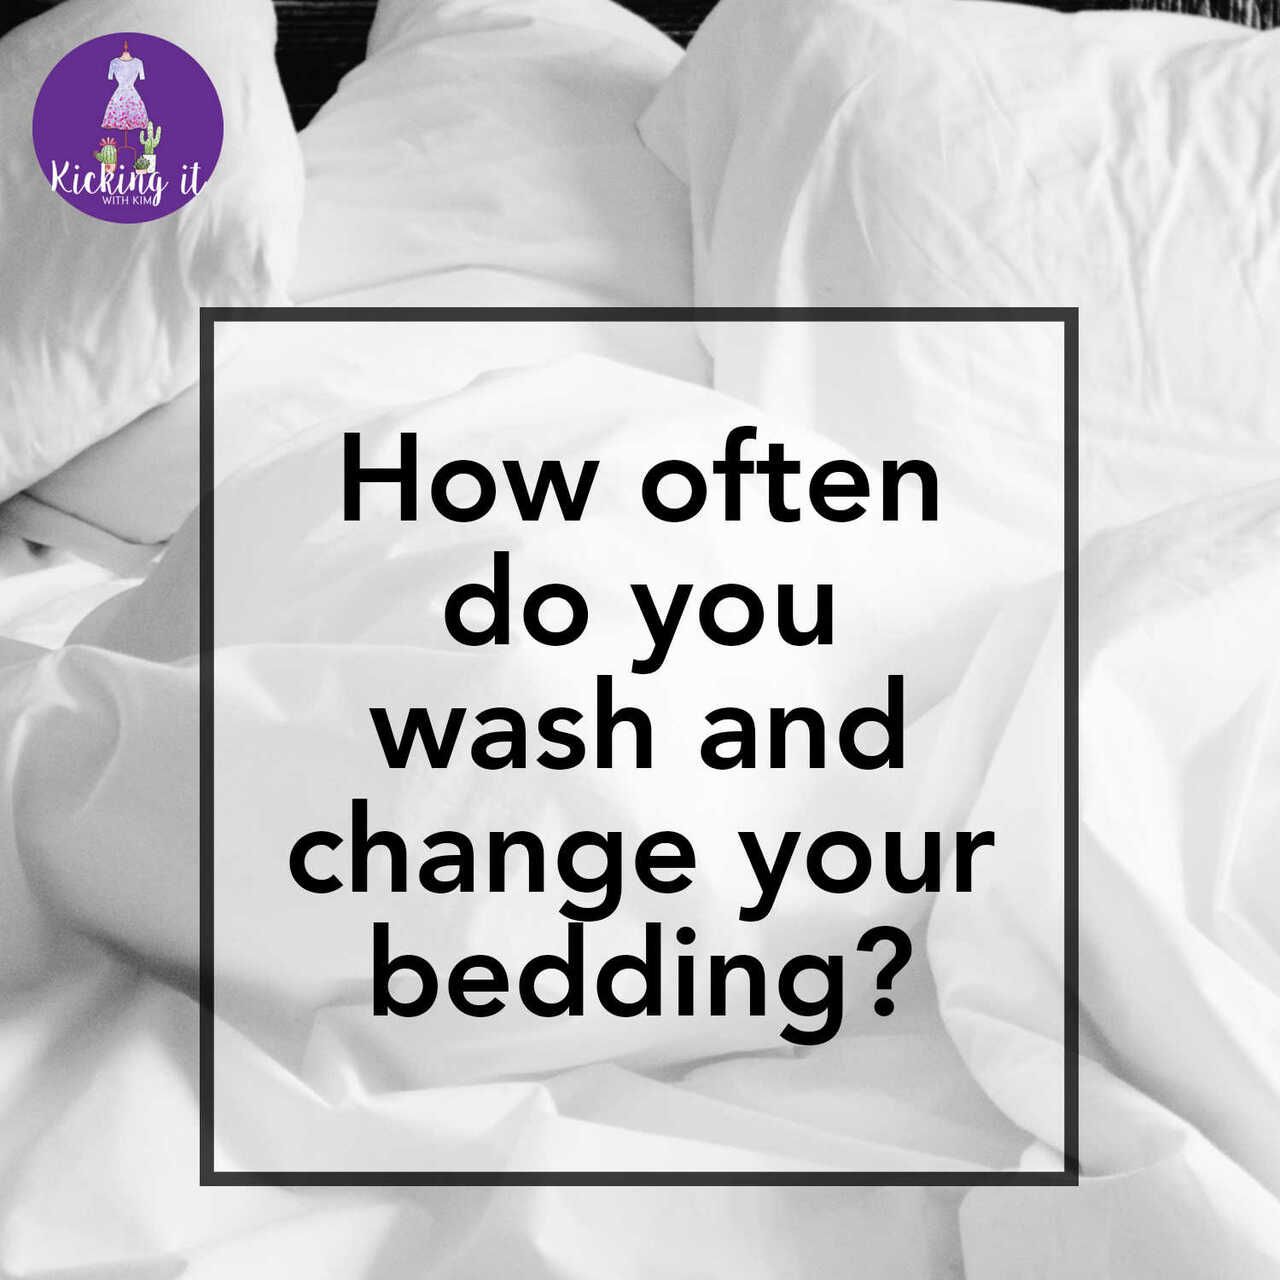 Take Good Care Of Your Bedding